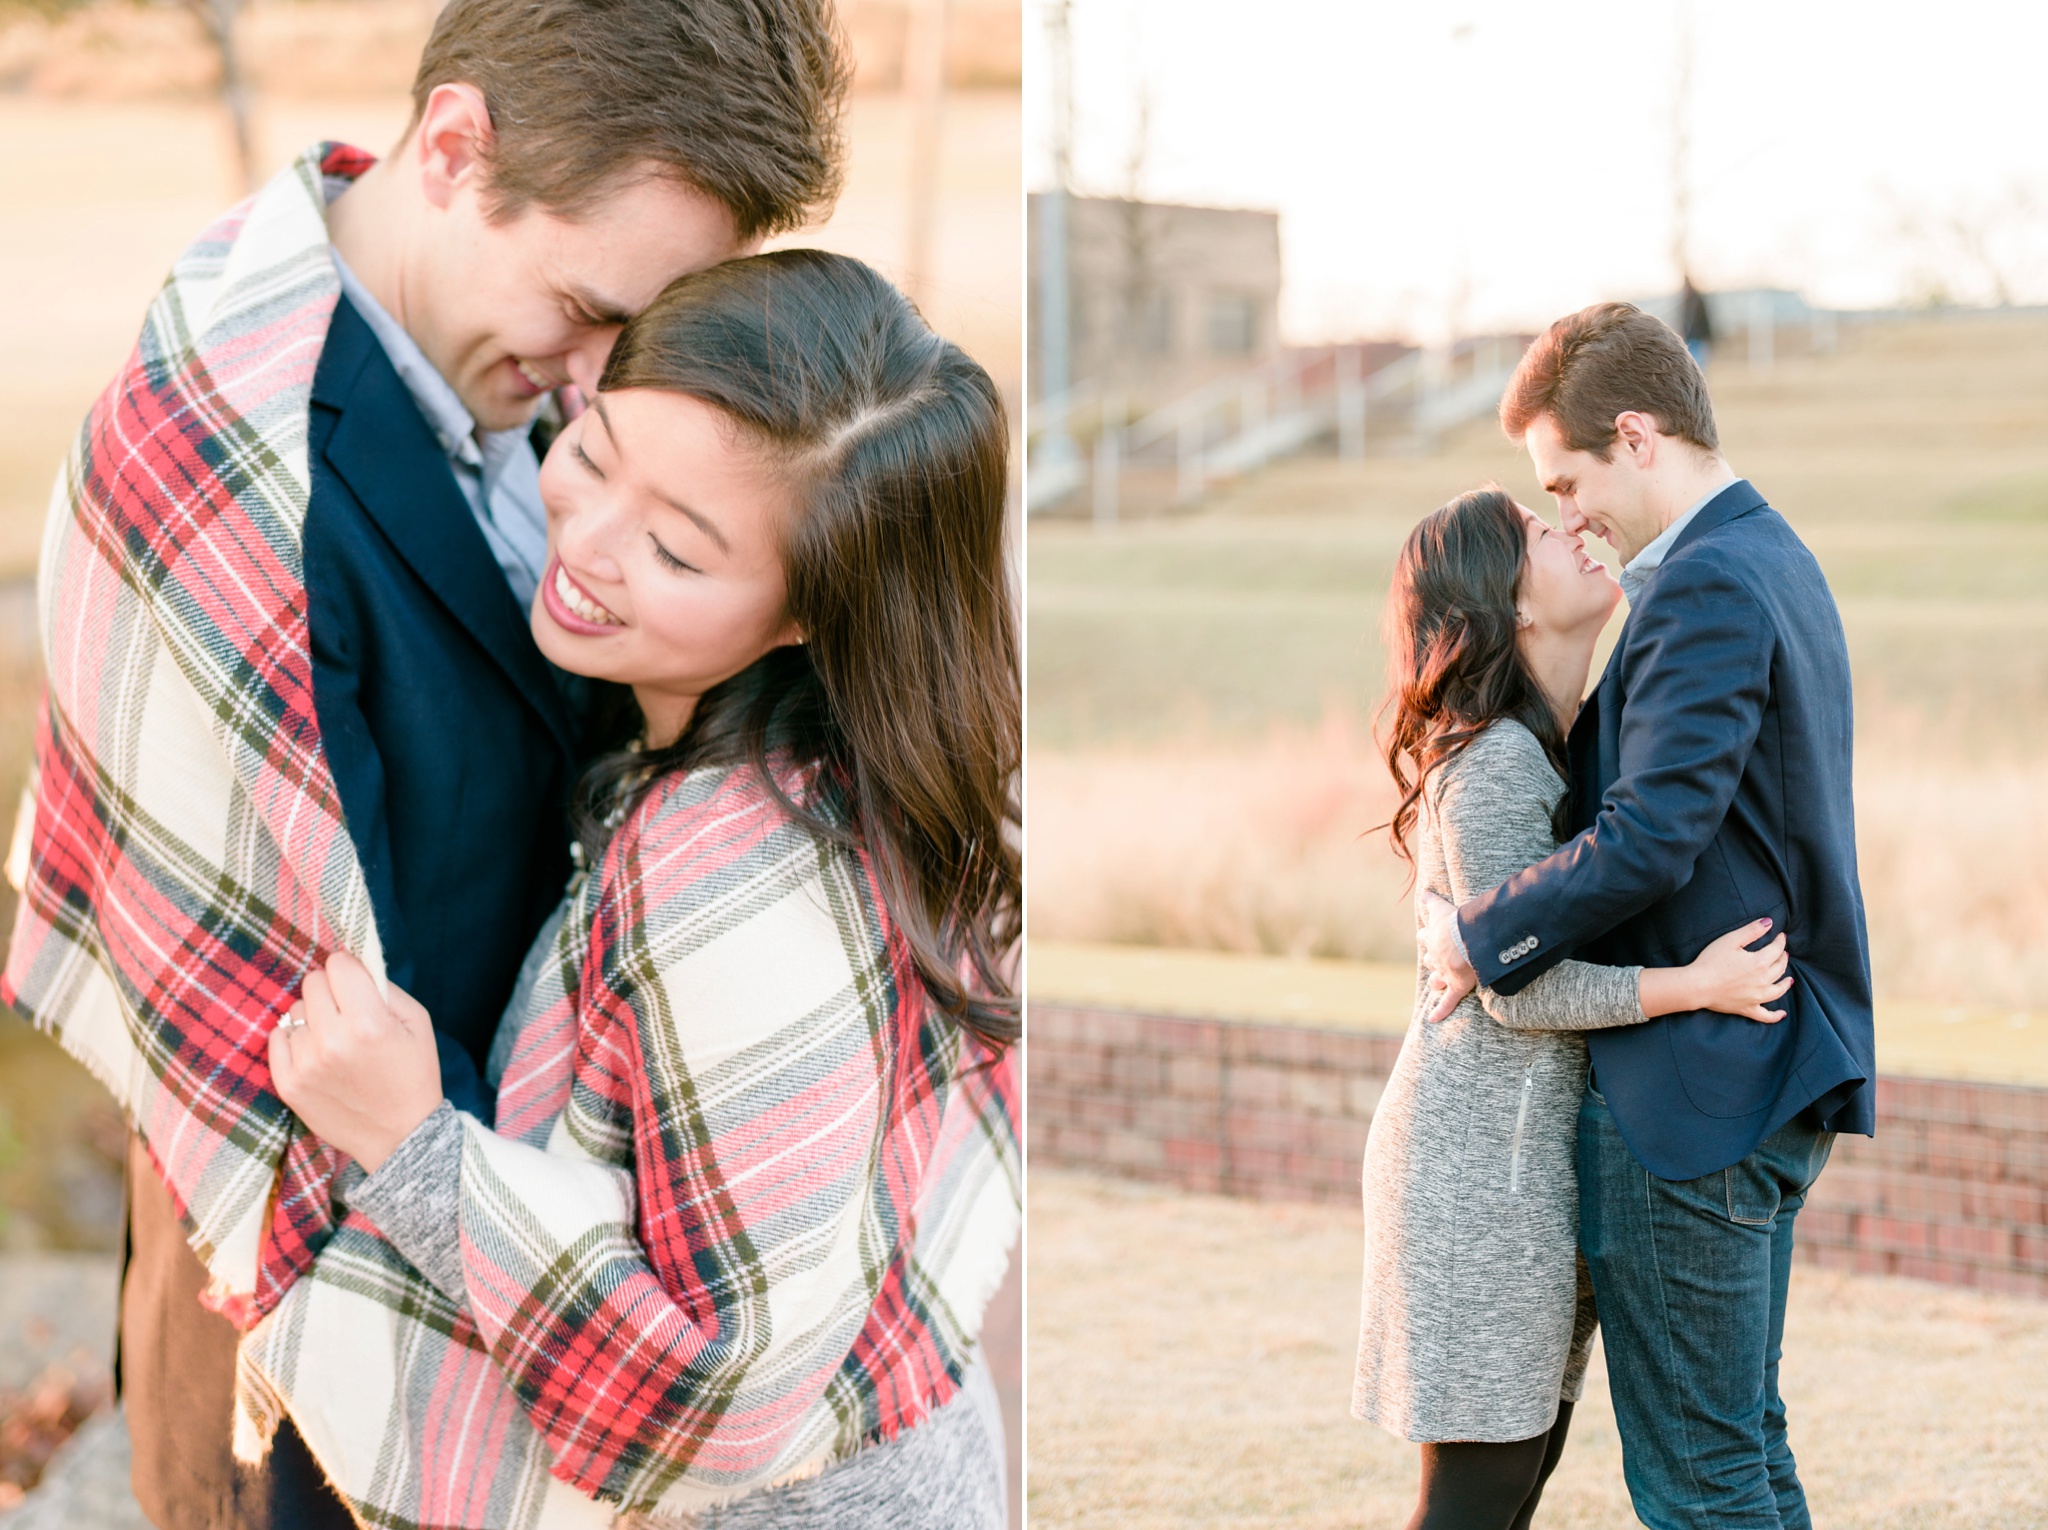 Downtown Nice to Have You in Birmingham Engagement Session| Birmingham Alabama Wedding Photographers_0024.jpg